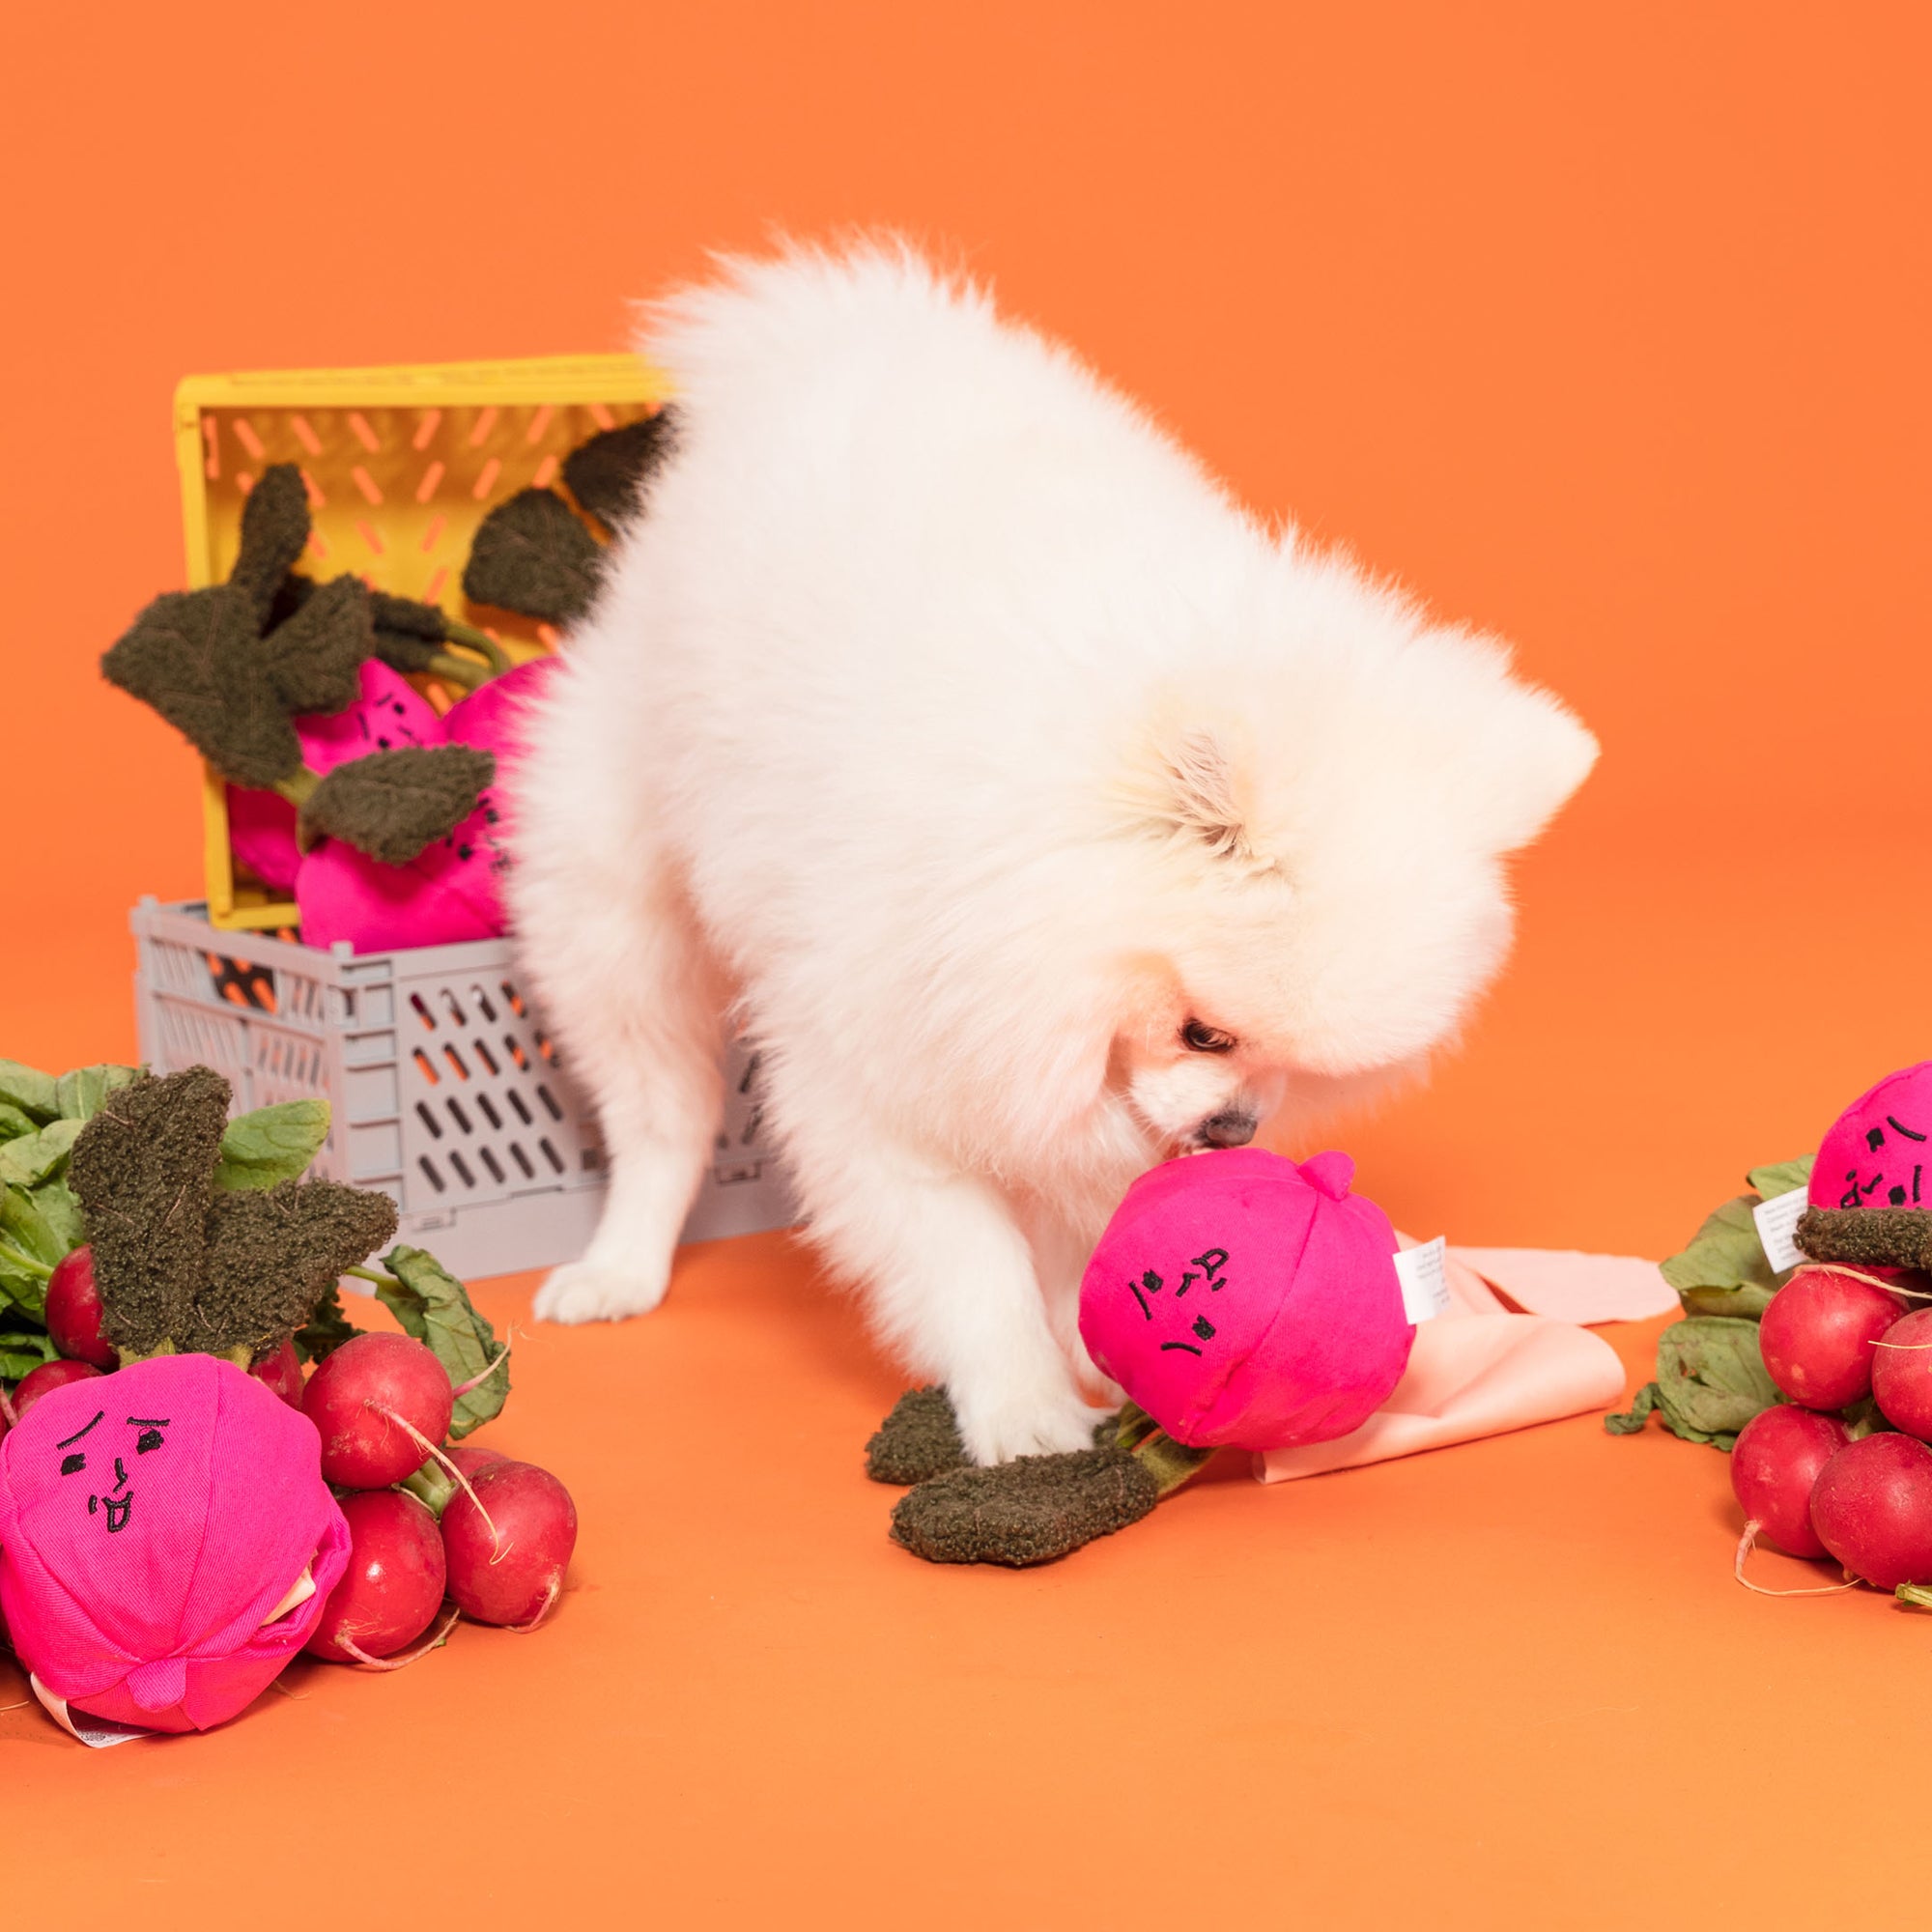 The image shows a fluffy white dog, resembling a Pomeranian, interacting with a vibrant pink radish-shaped toy on an orange background. Nearby is a white crate filled with more of these toys, and real radishes are scattered around, creating a playful and colorful scene. The dog's attention to the toy, along with the cheerful setting, suggests a fun and engaging environment, likely part of a promotional display for pet products.